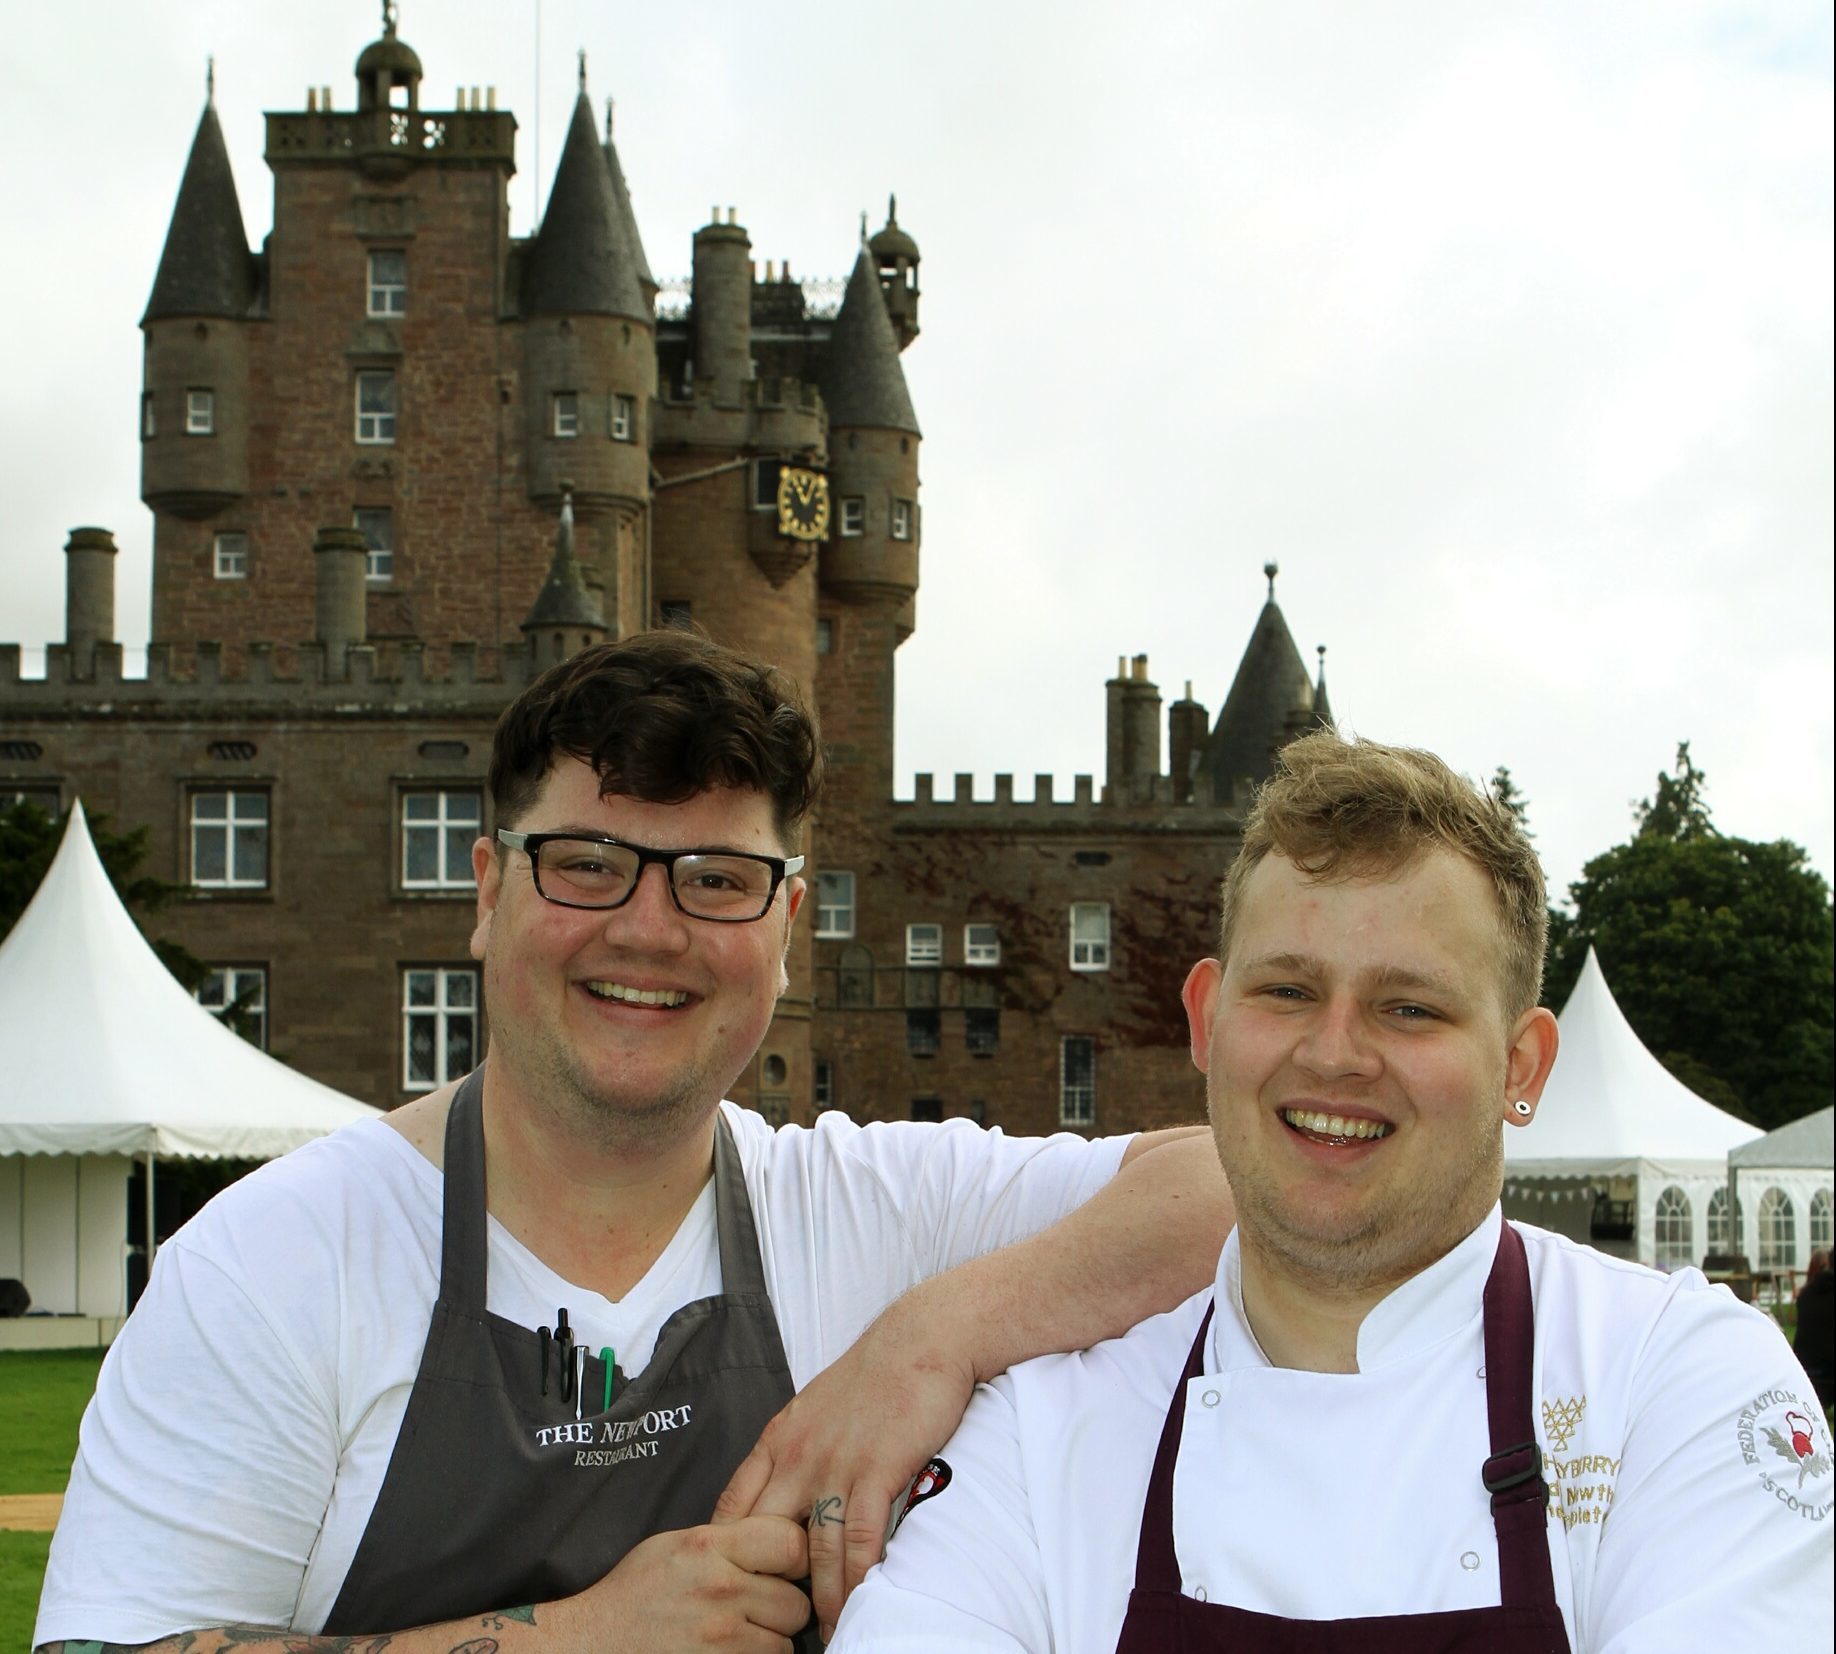 Chefs Jamie Scott, left, from The Newport, and Adam Newth from The Tayberry at the Glamis Castle event